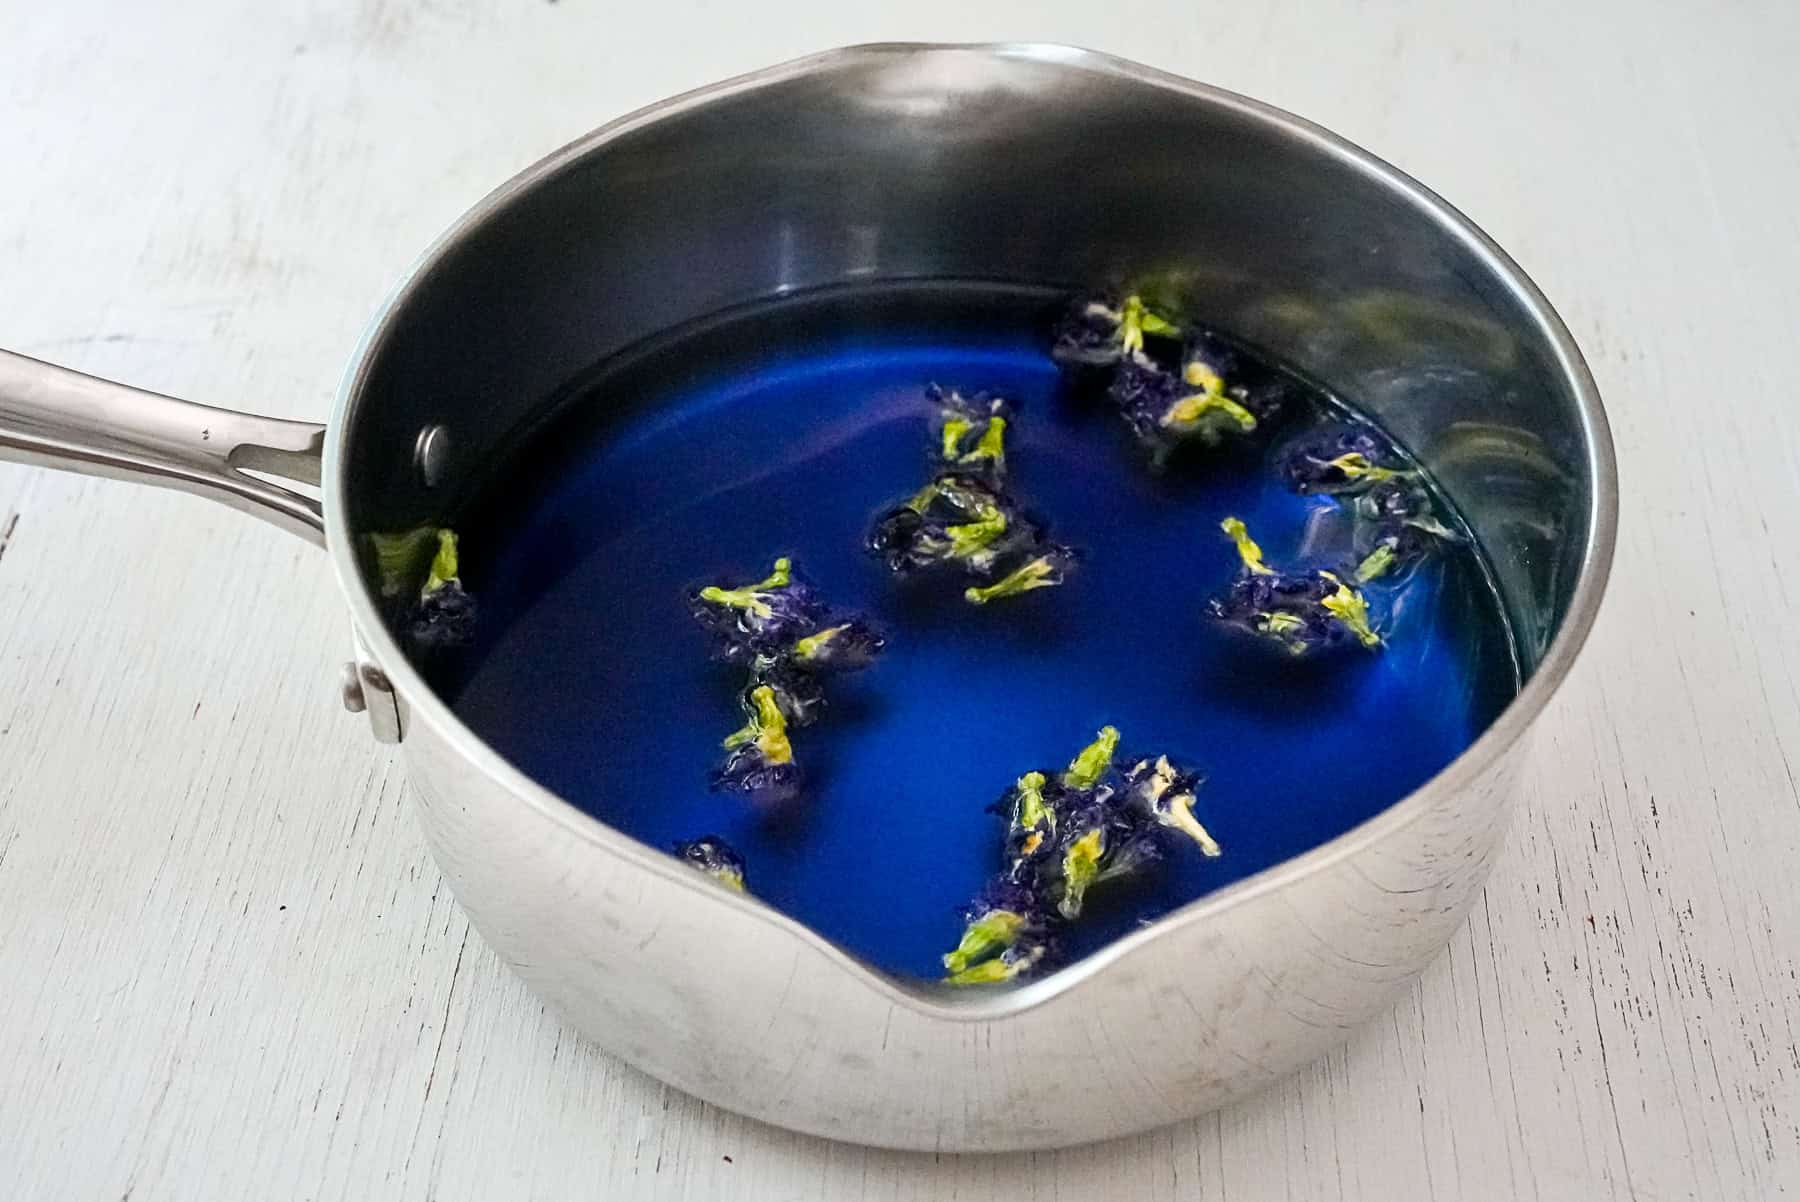 Allow butterfly pea flowers to steep in water